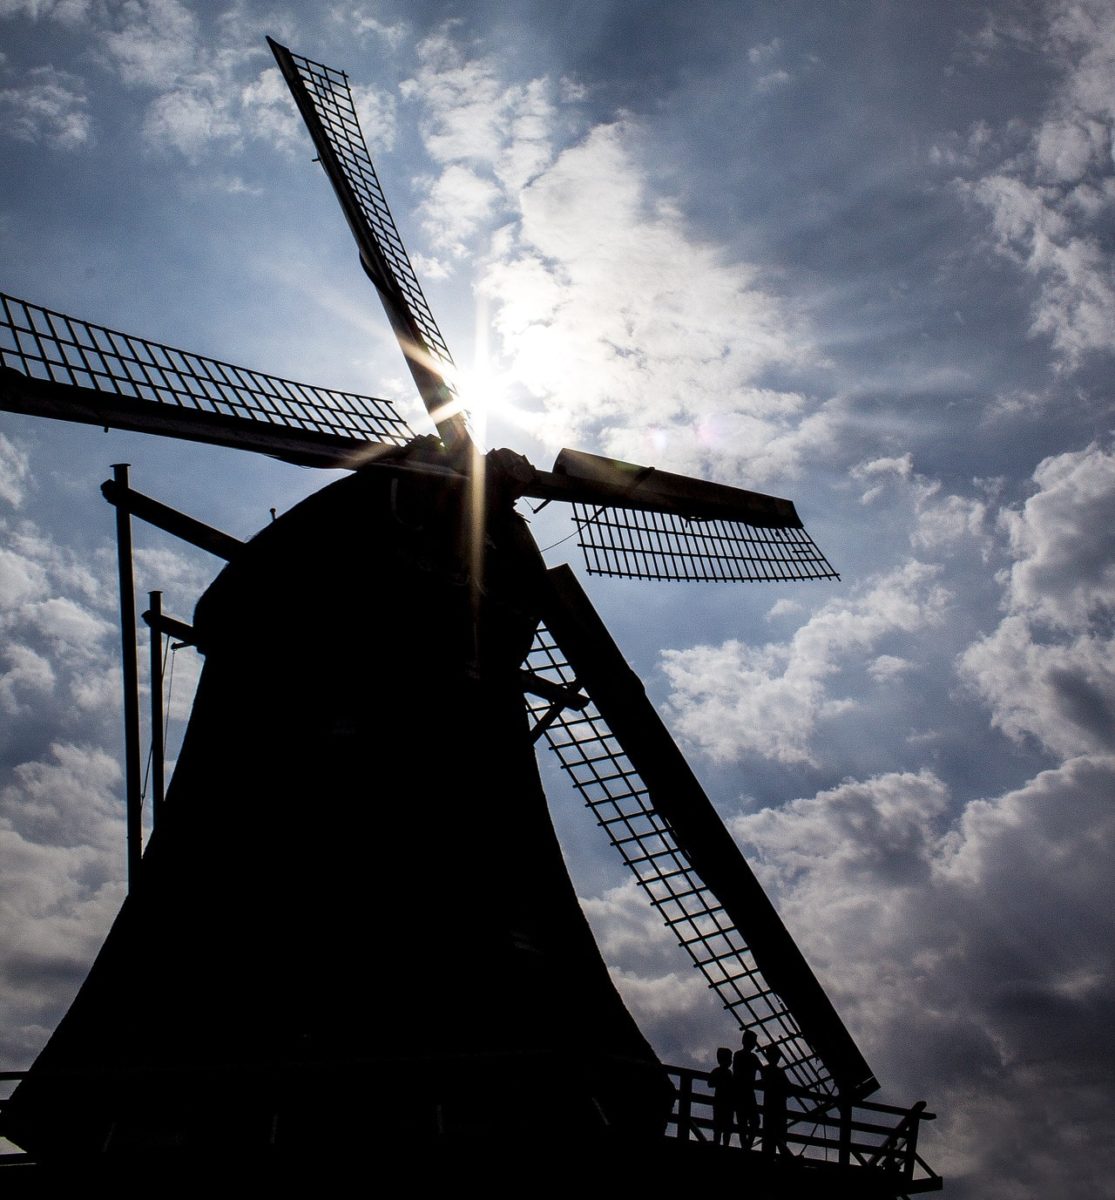 Netherlands may add 3.3 GW of new solar this year